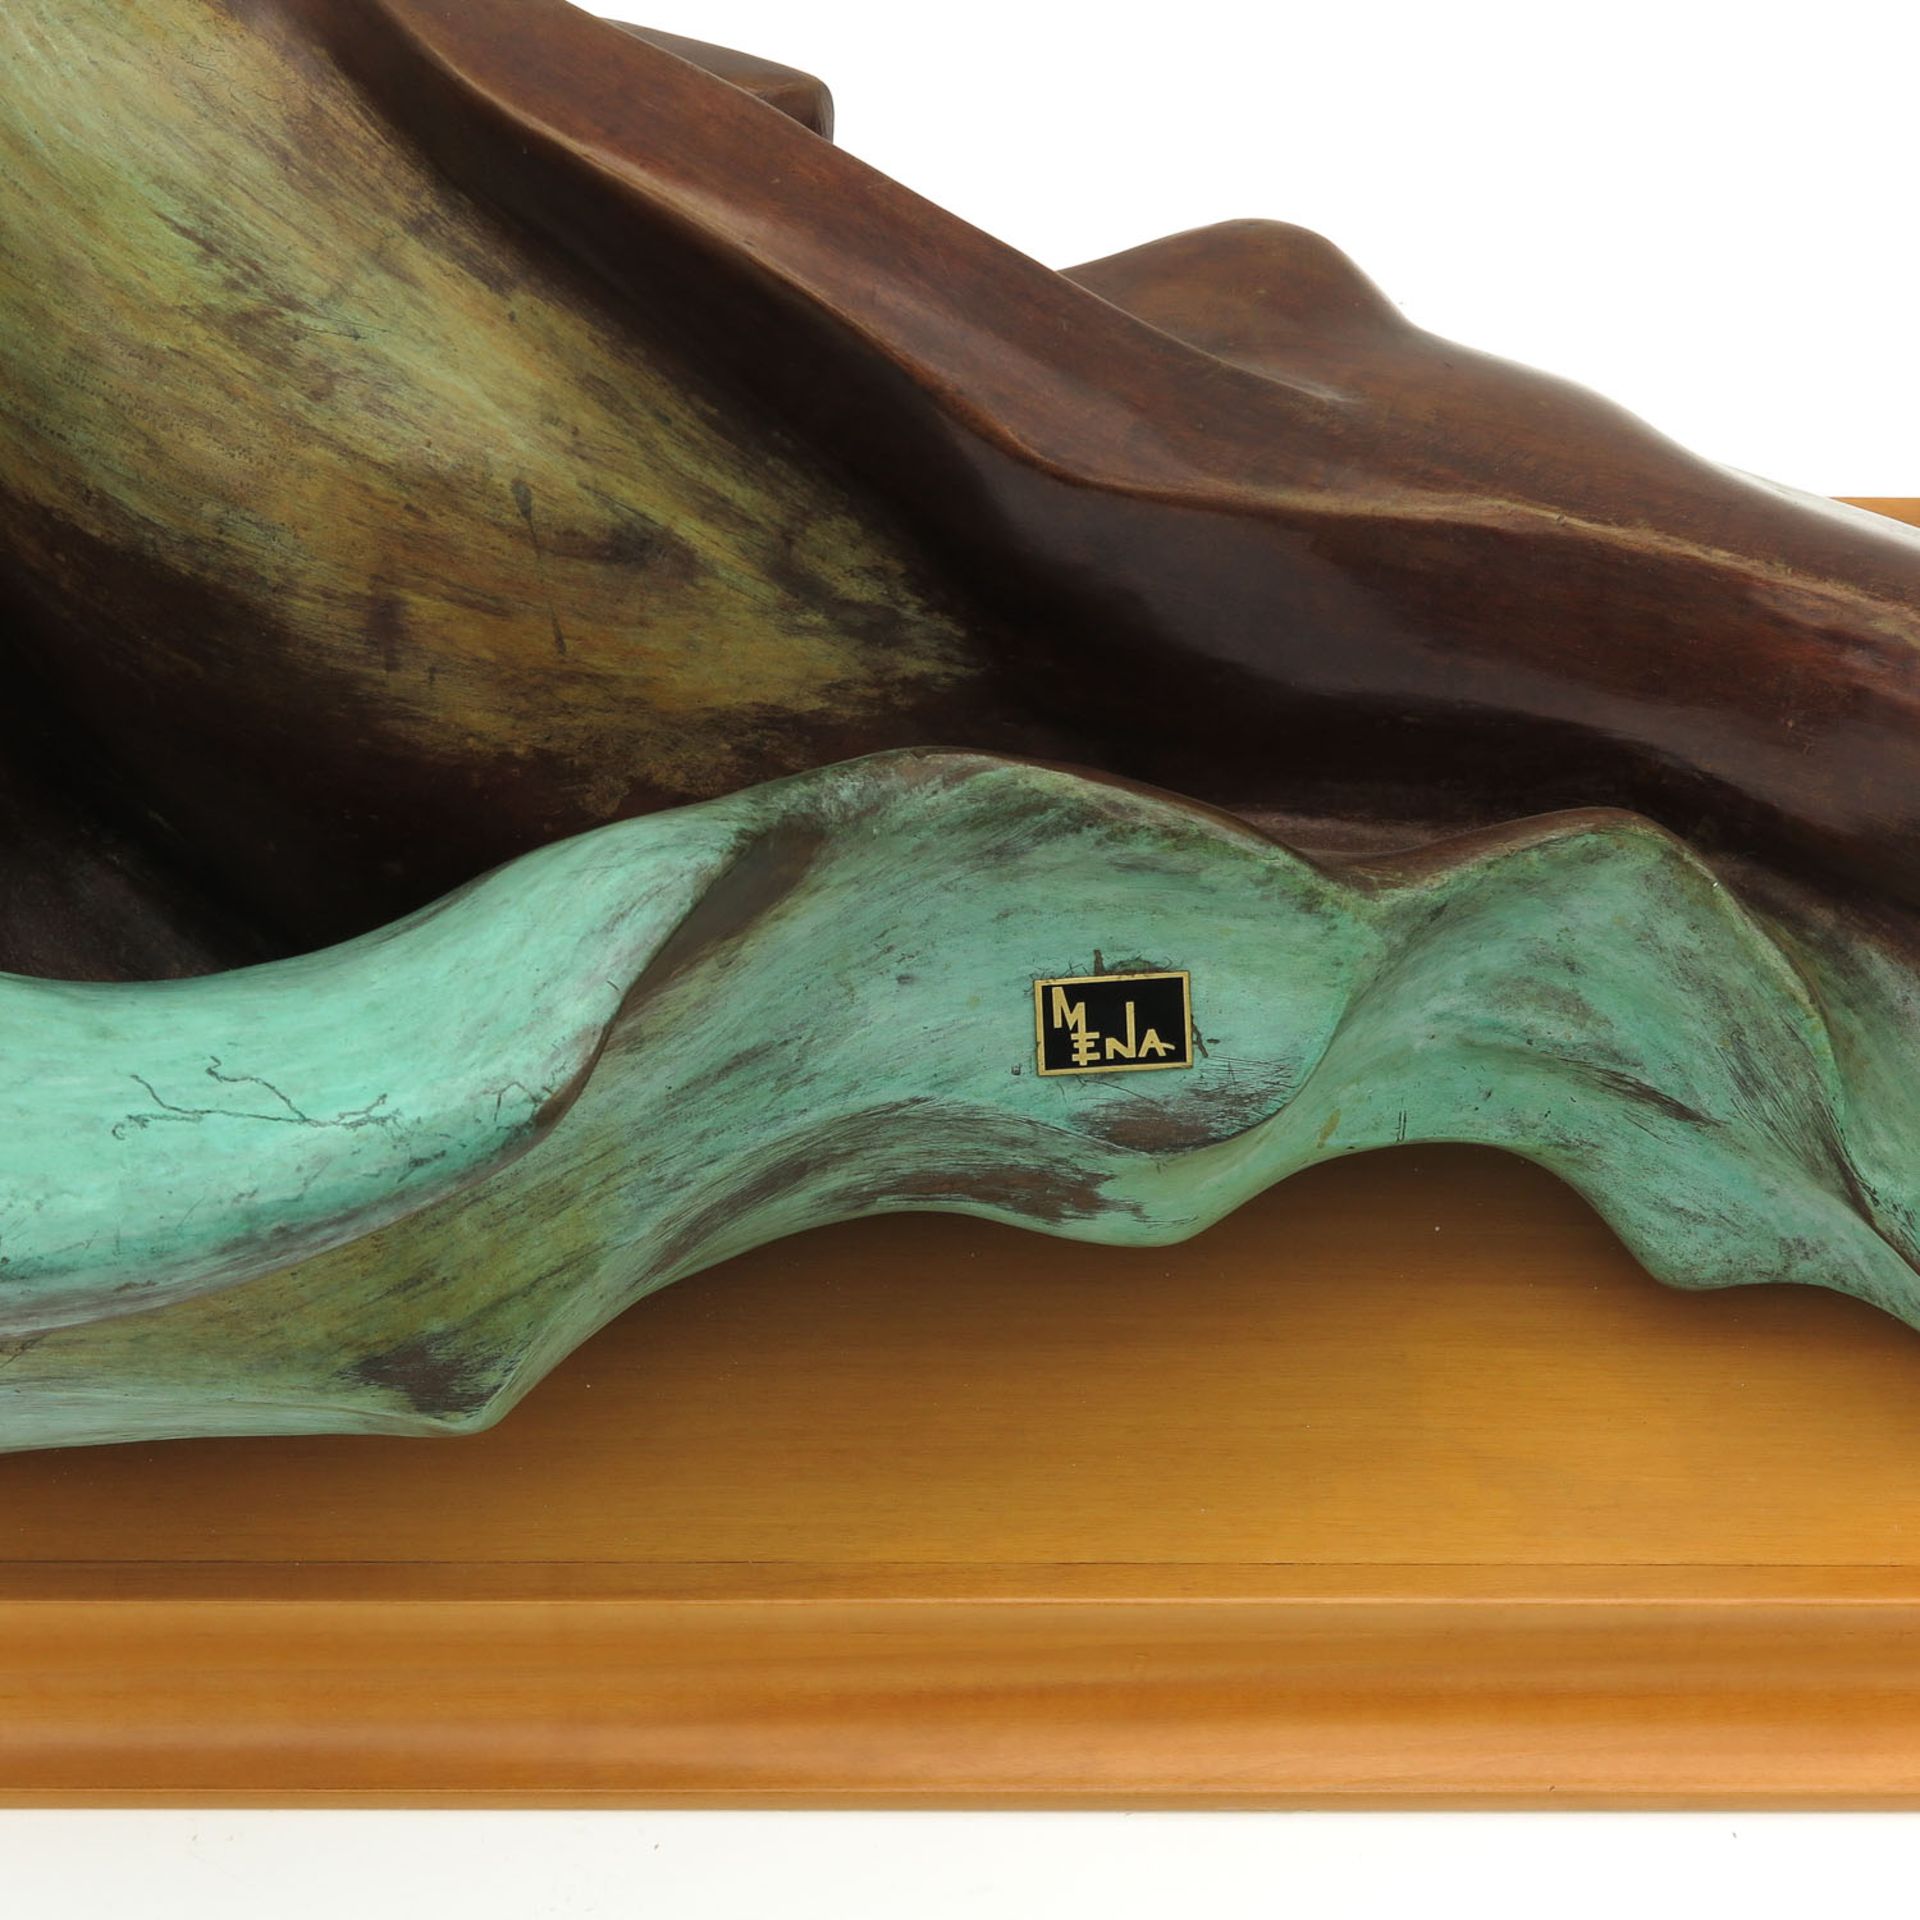 A Bronze Sculpture of Lady and Shell - Image 4 of 5